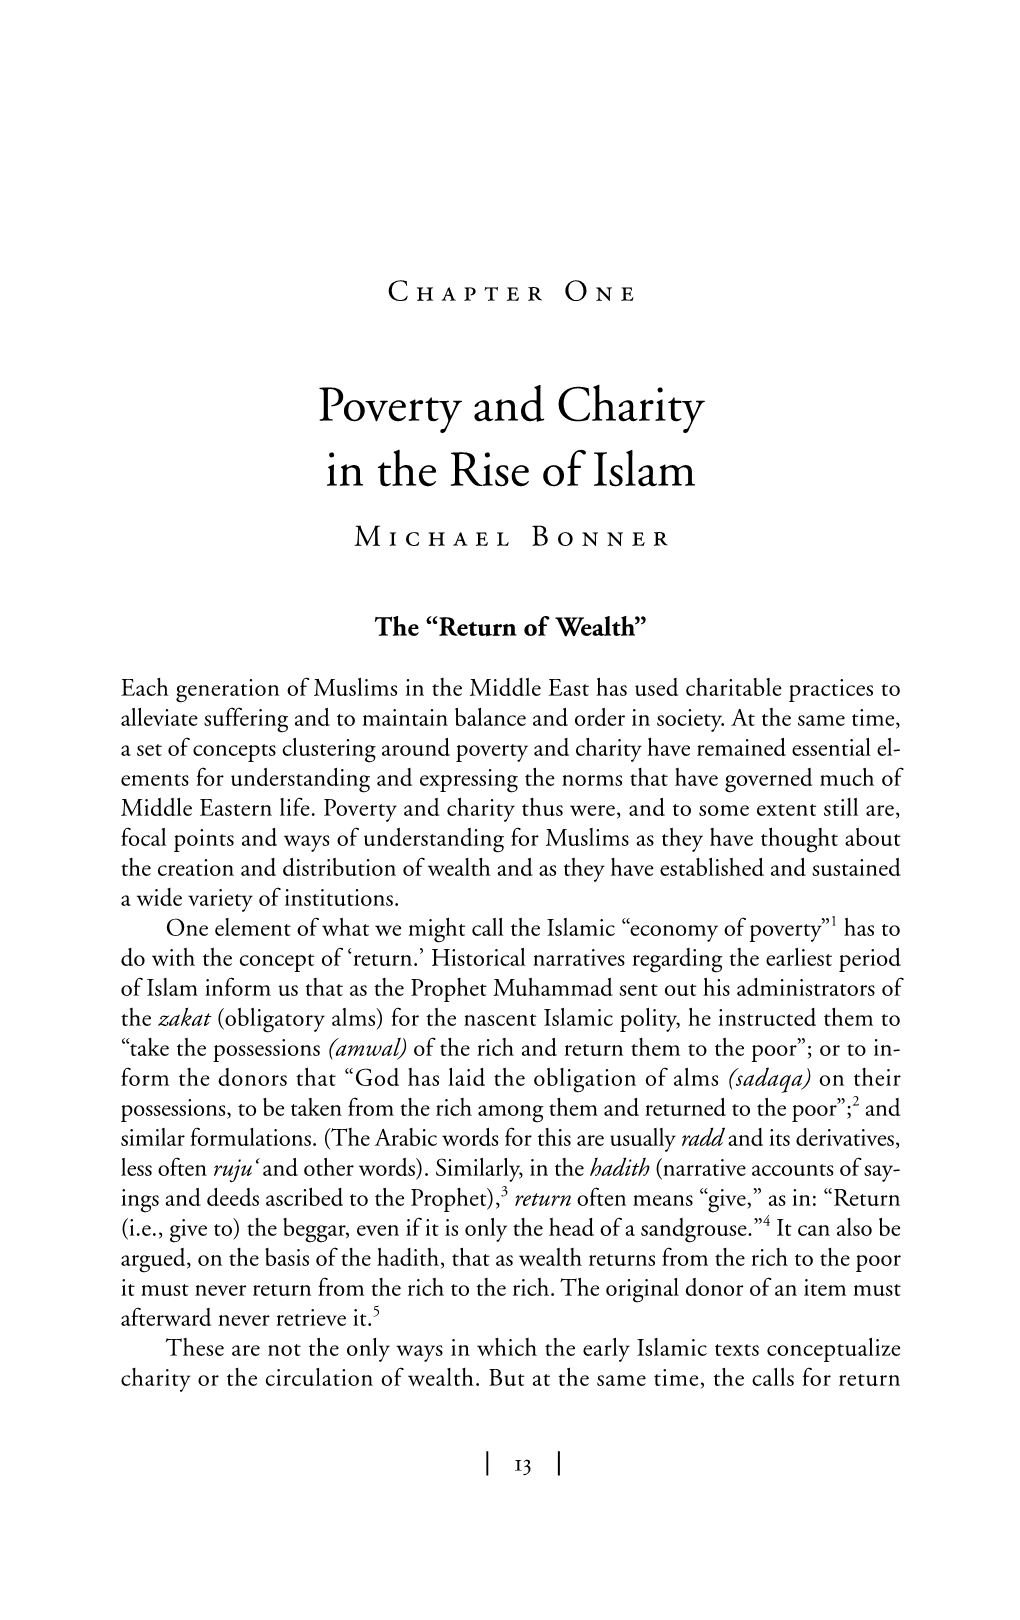 Poverty and Charity in the Rise of Islam Michael Bonner